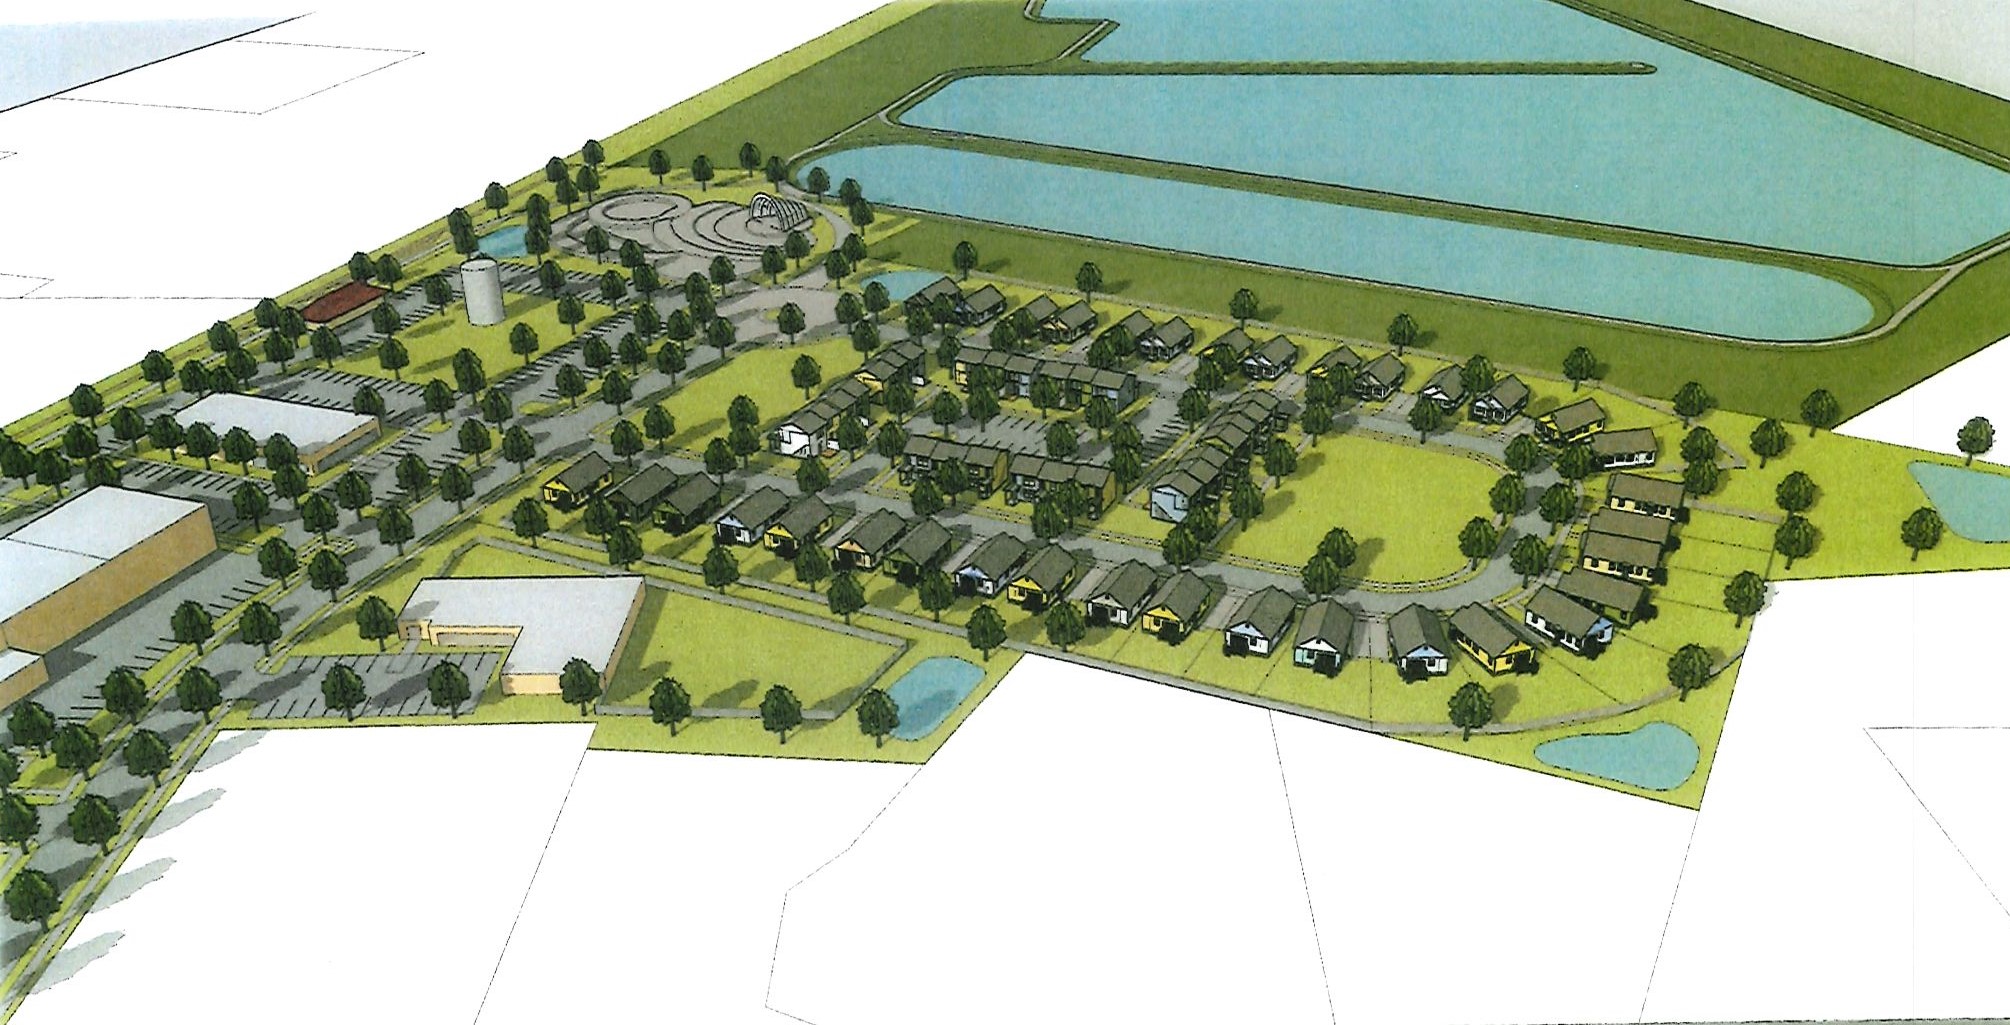 The developer offers a different vision for the Heron Park property;  Burbage proposes 59 homes